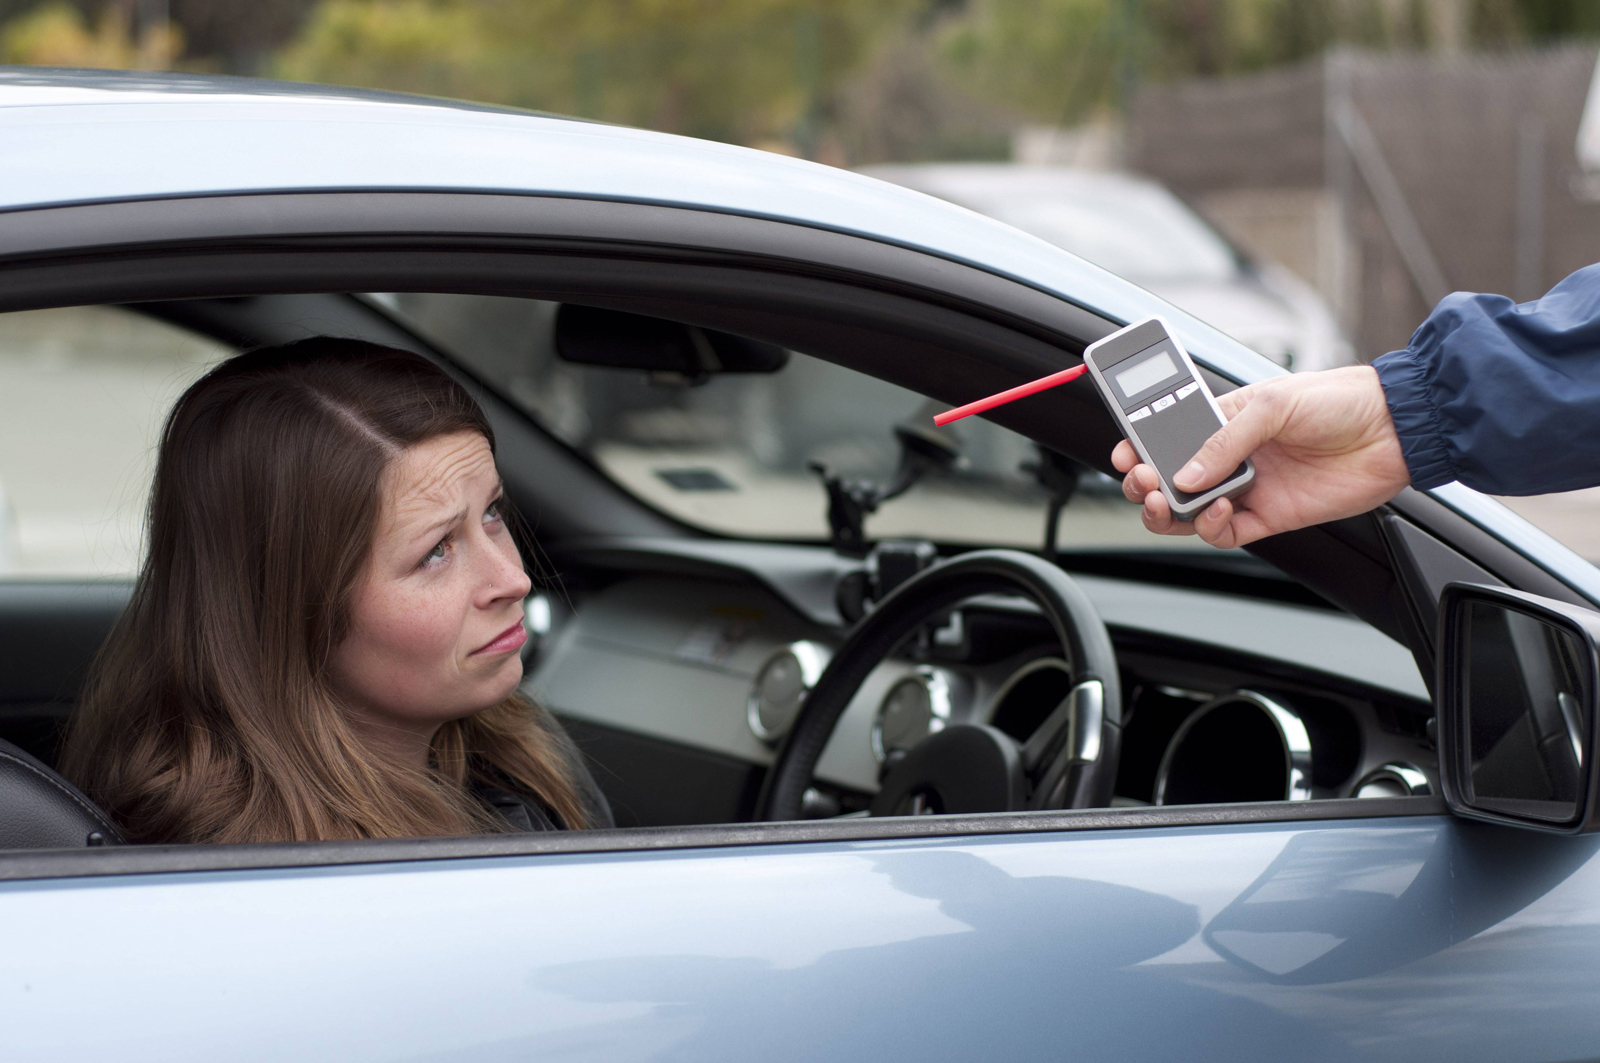 A woman loooking unhappy as she fails a roadside breathalyser test from her car